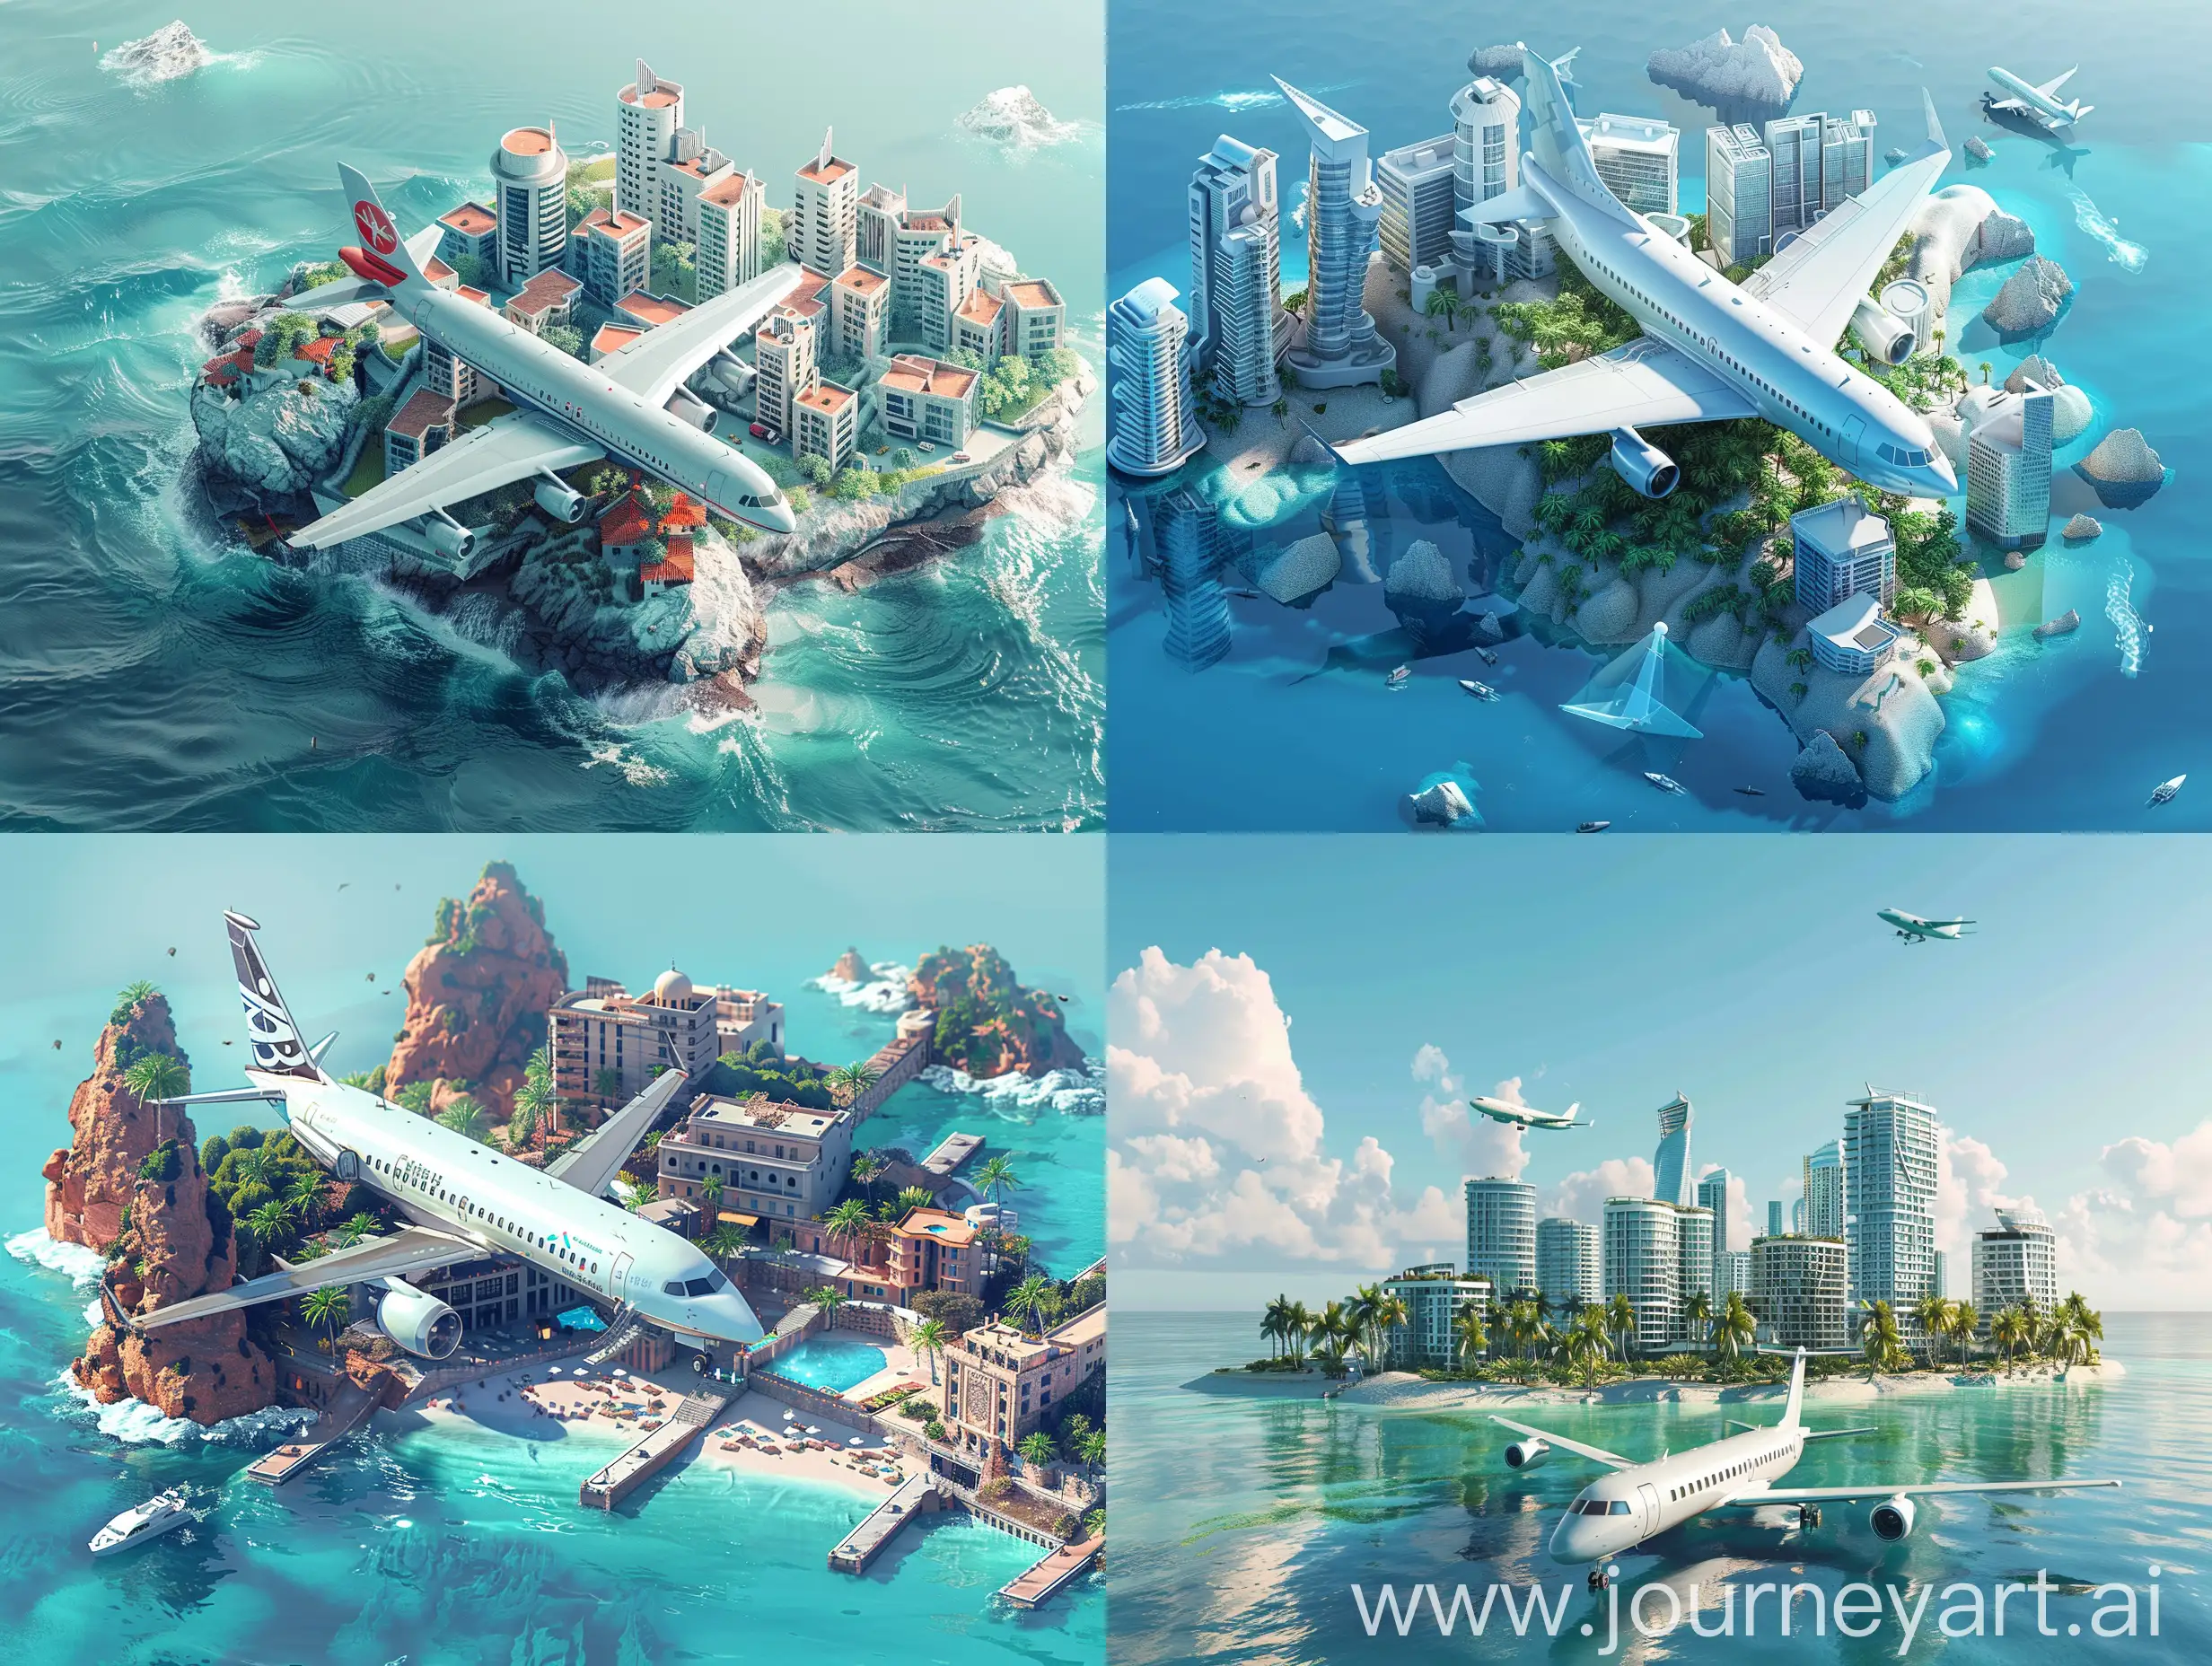 an airplane is sitting on an island with several buildings, in the style of industrial and product design,light blue and white, data visualization, glazed surfaces, bold graphic illustrations, fluid networks, hyper-realistic water
